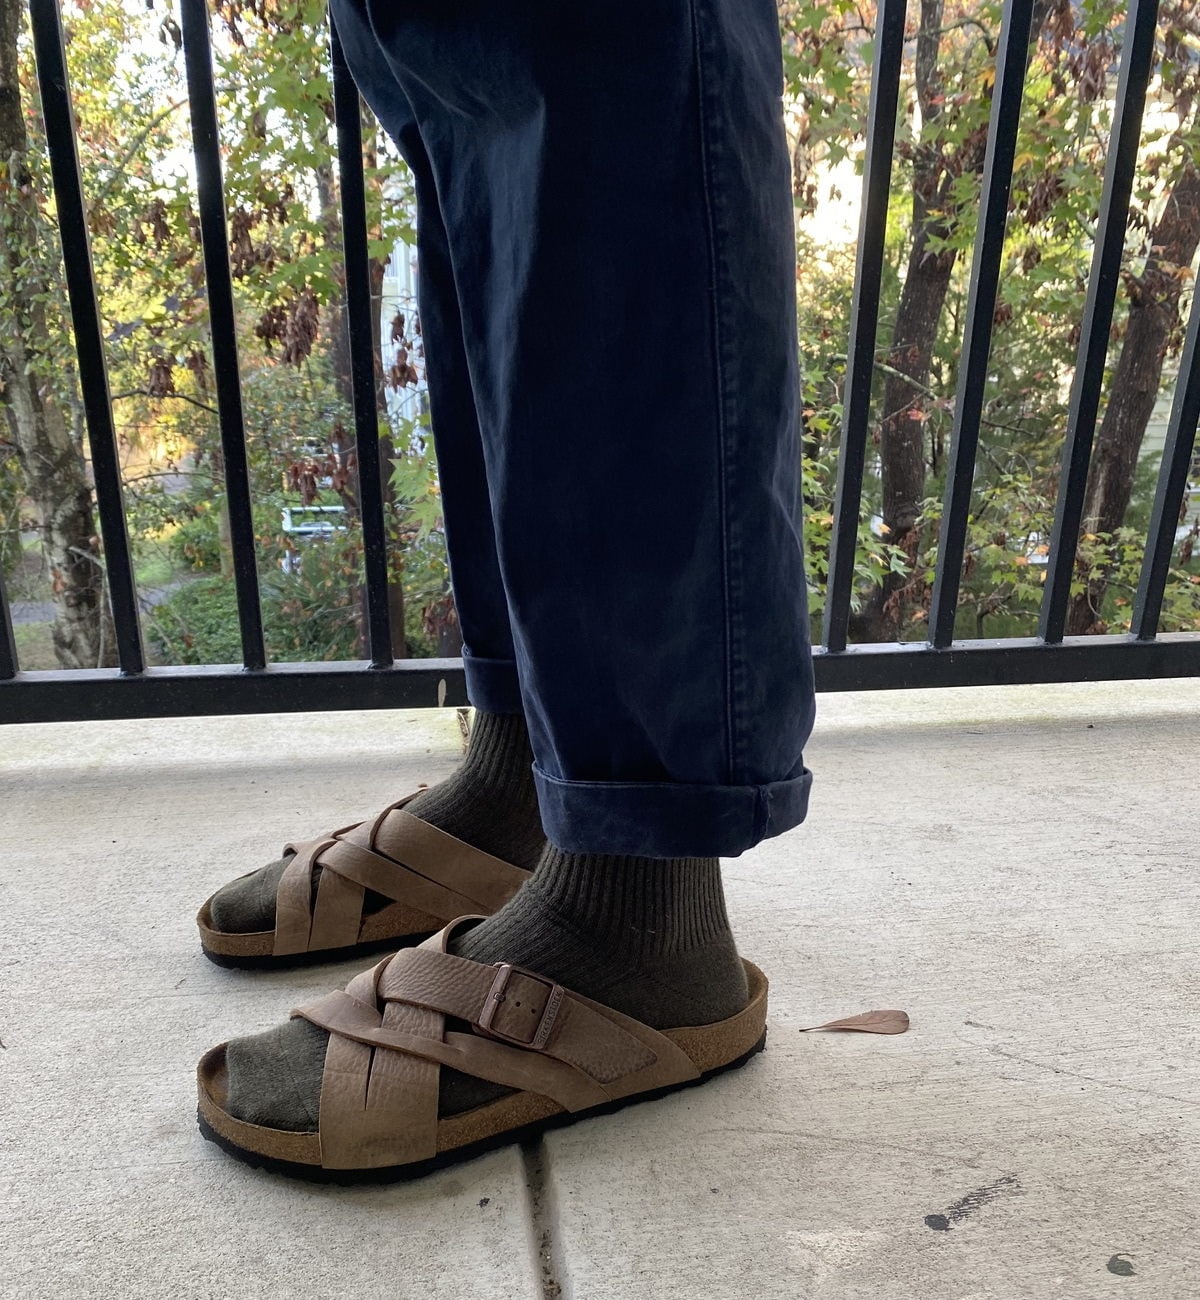 Birkenstocks Review After 1.5 Years: They're Overrated - TMM